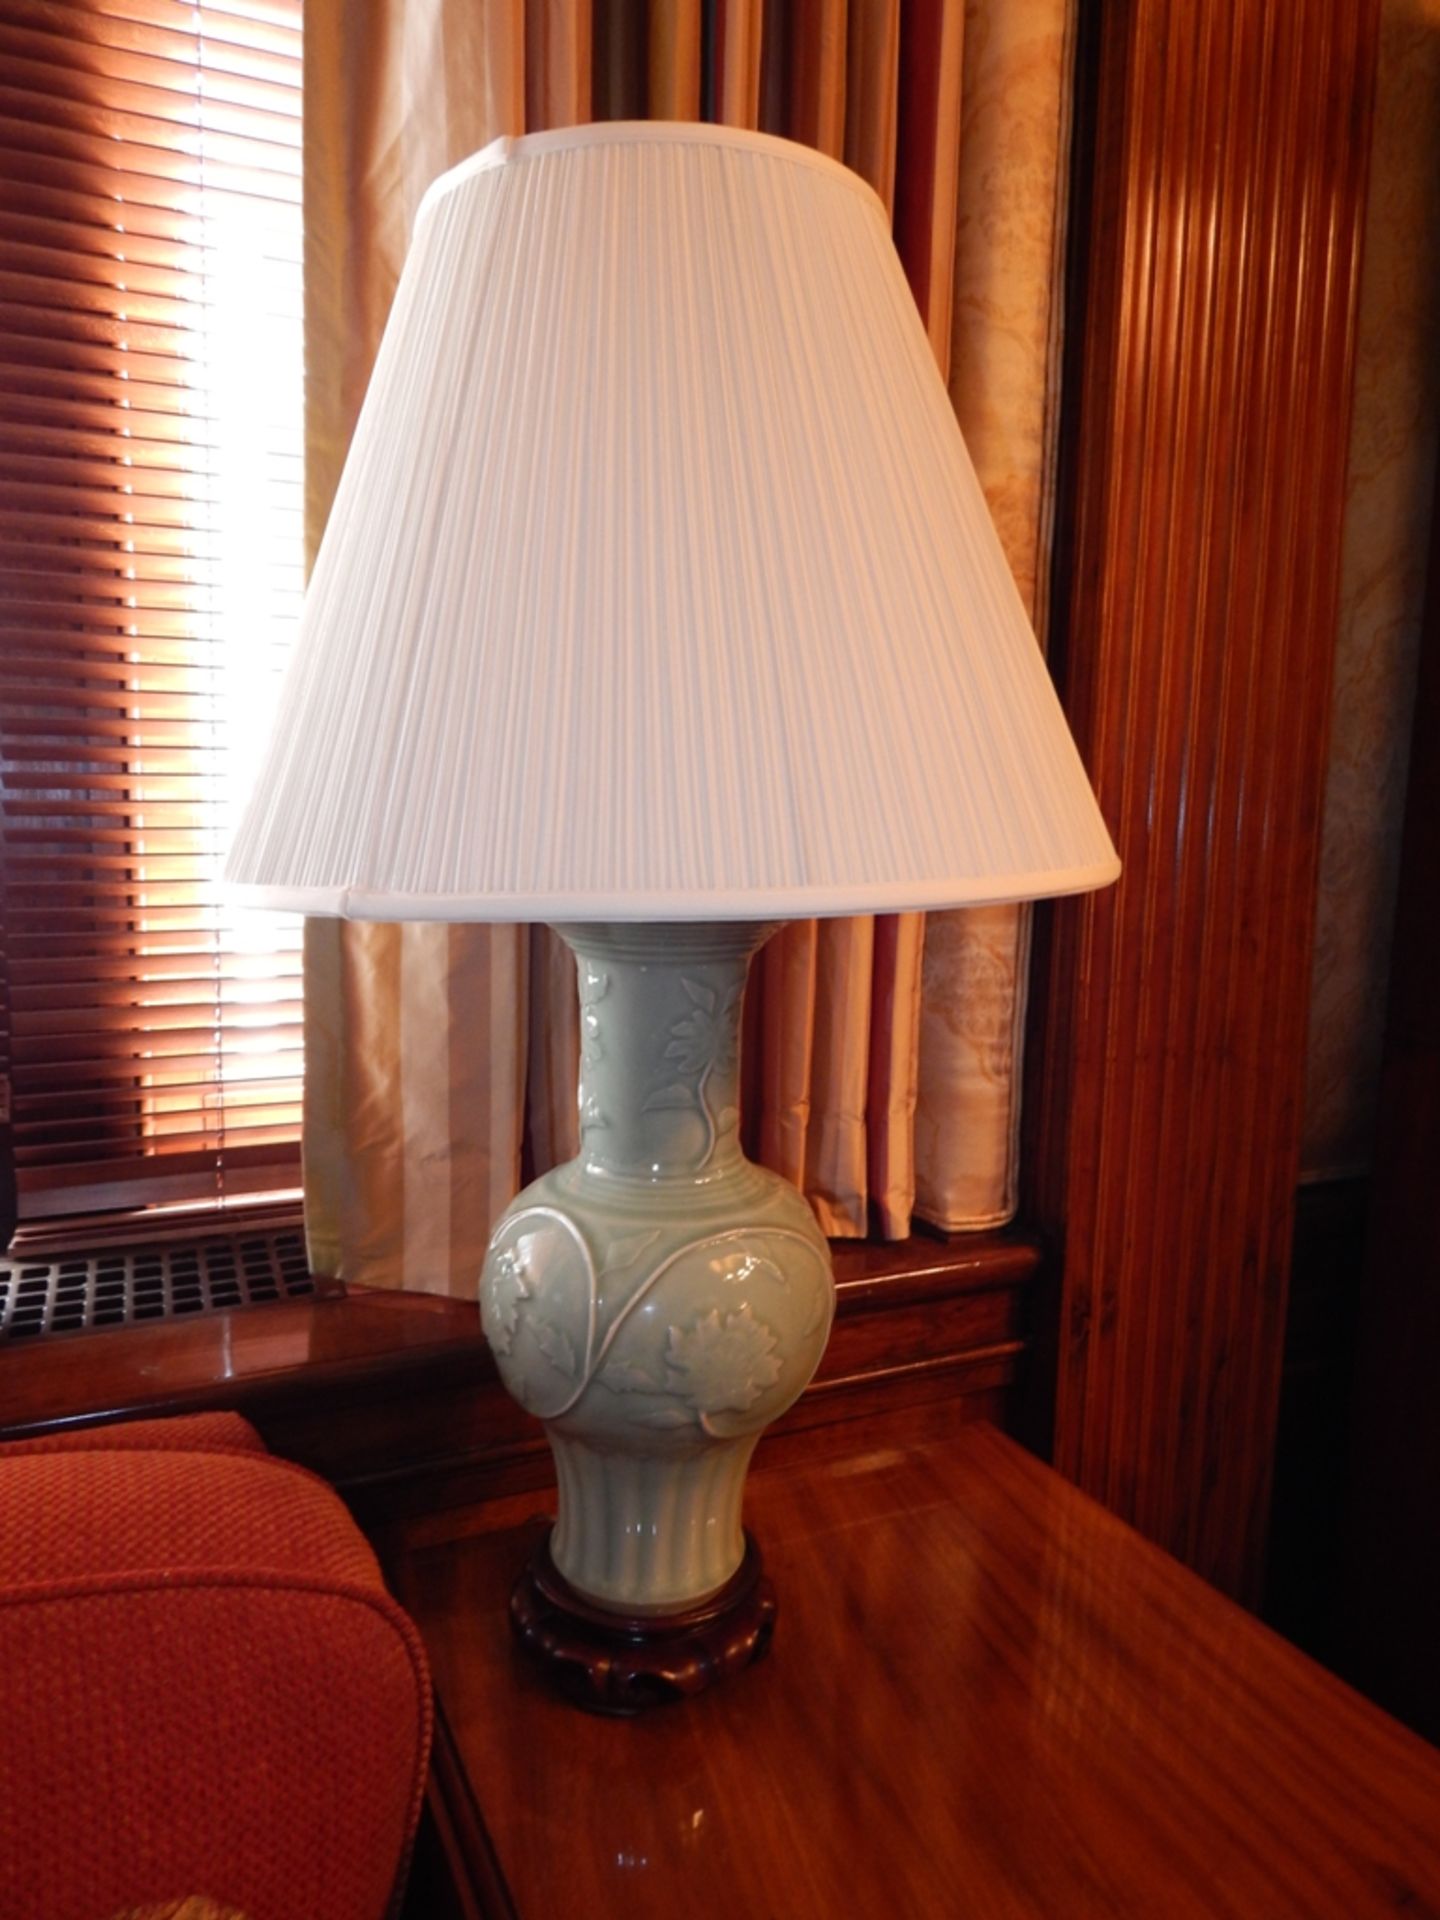 Korean Celadon Pottery Lamp with Rosewood Base - Image 2 of 7